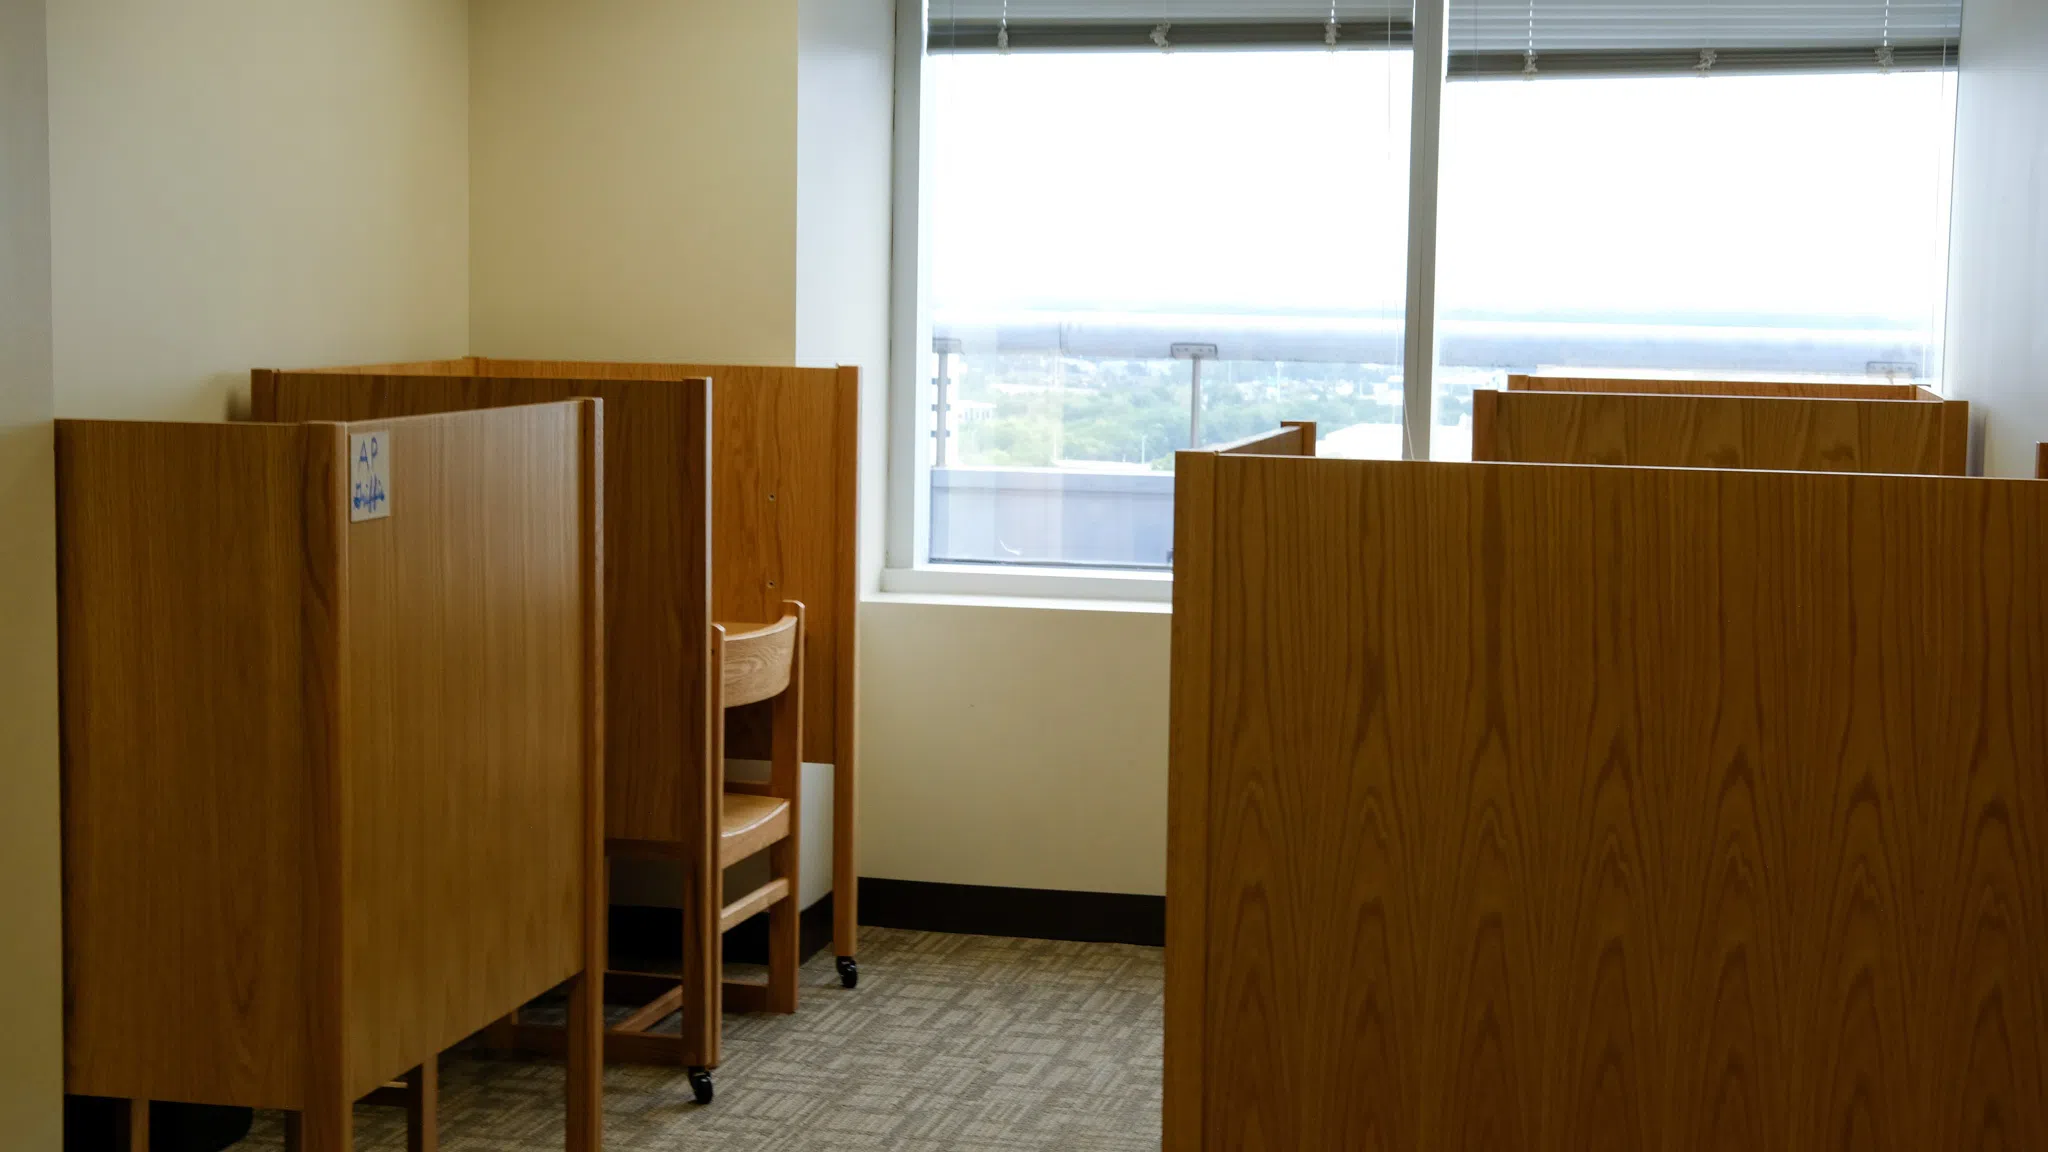 Four study carrels arranged around a window with a view of downtown Jacksonville.